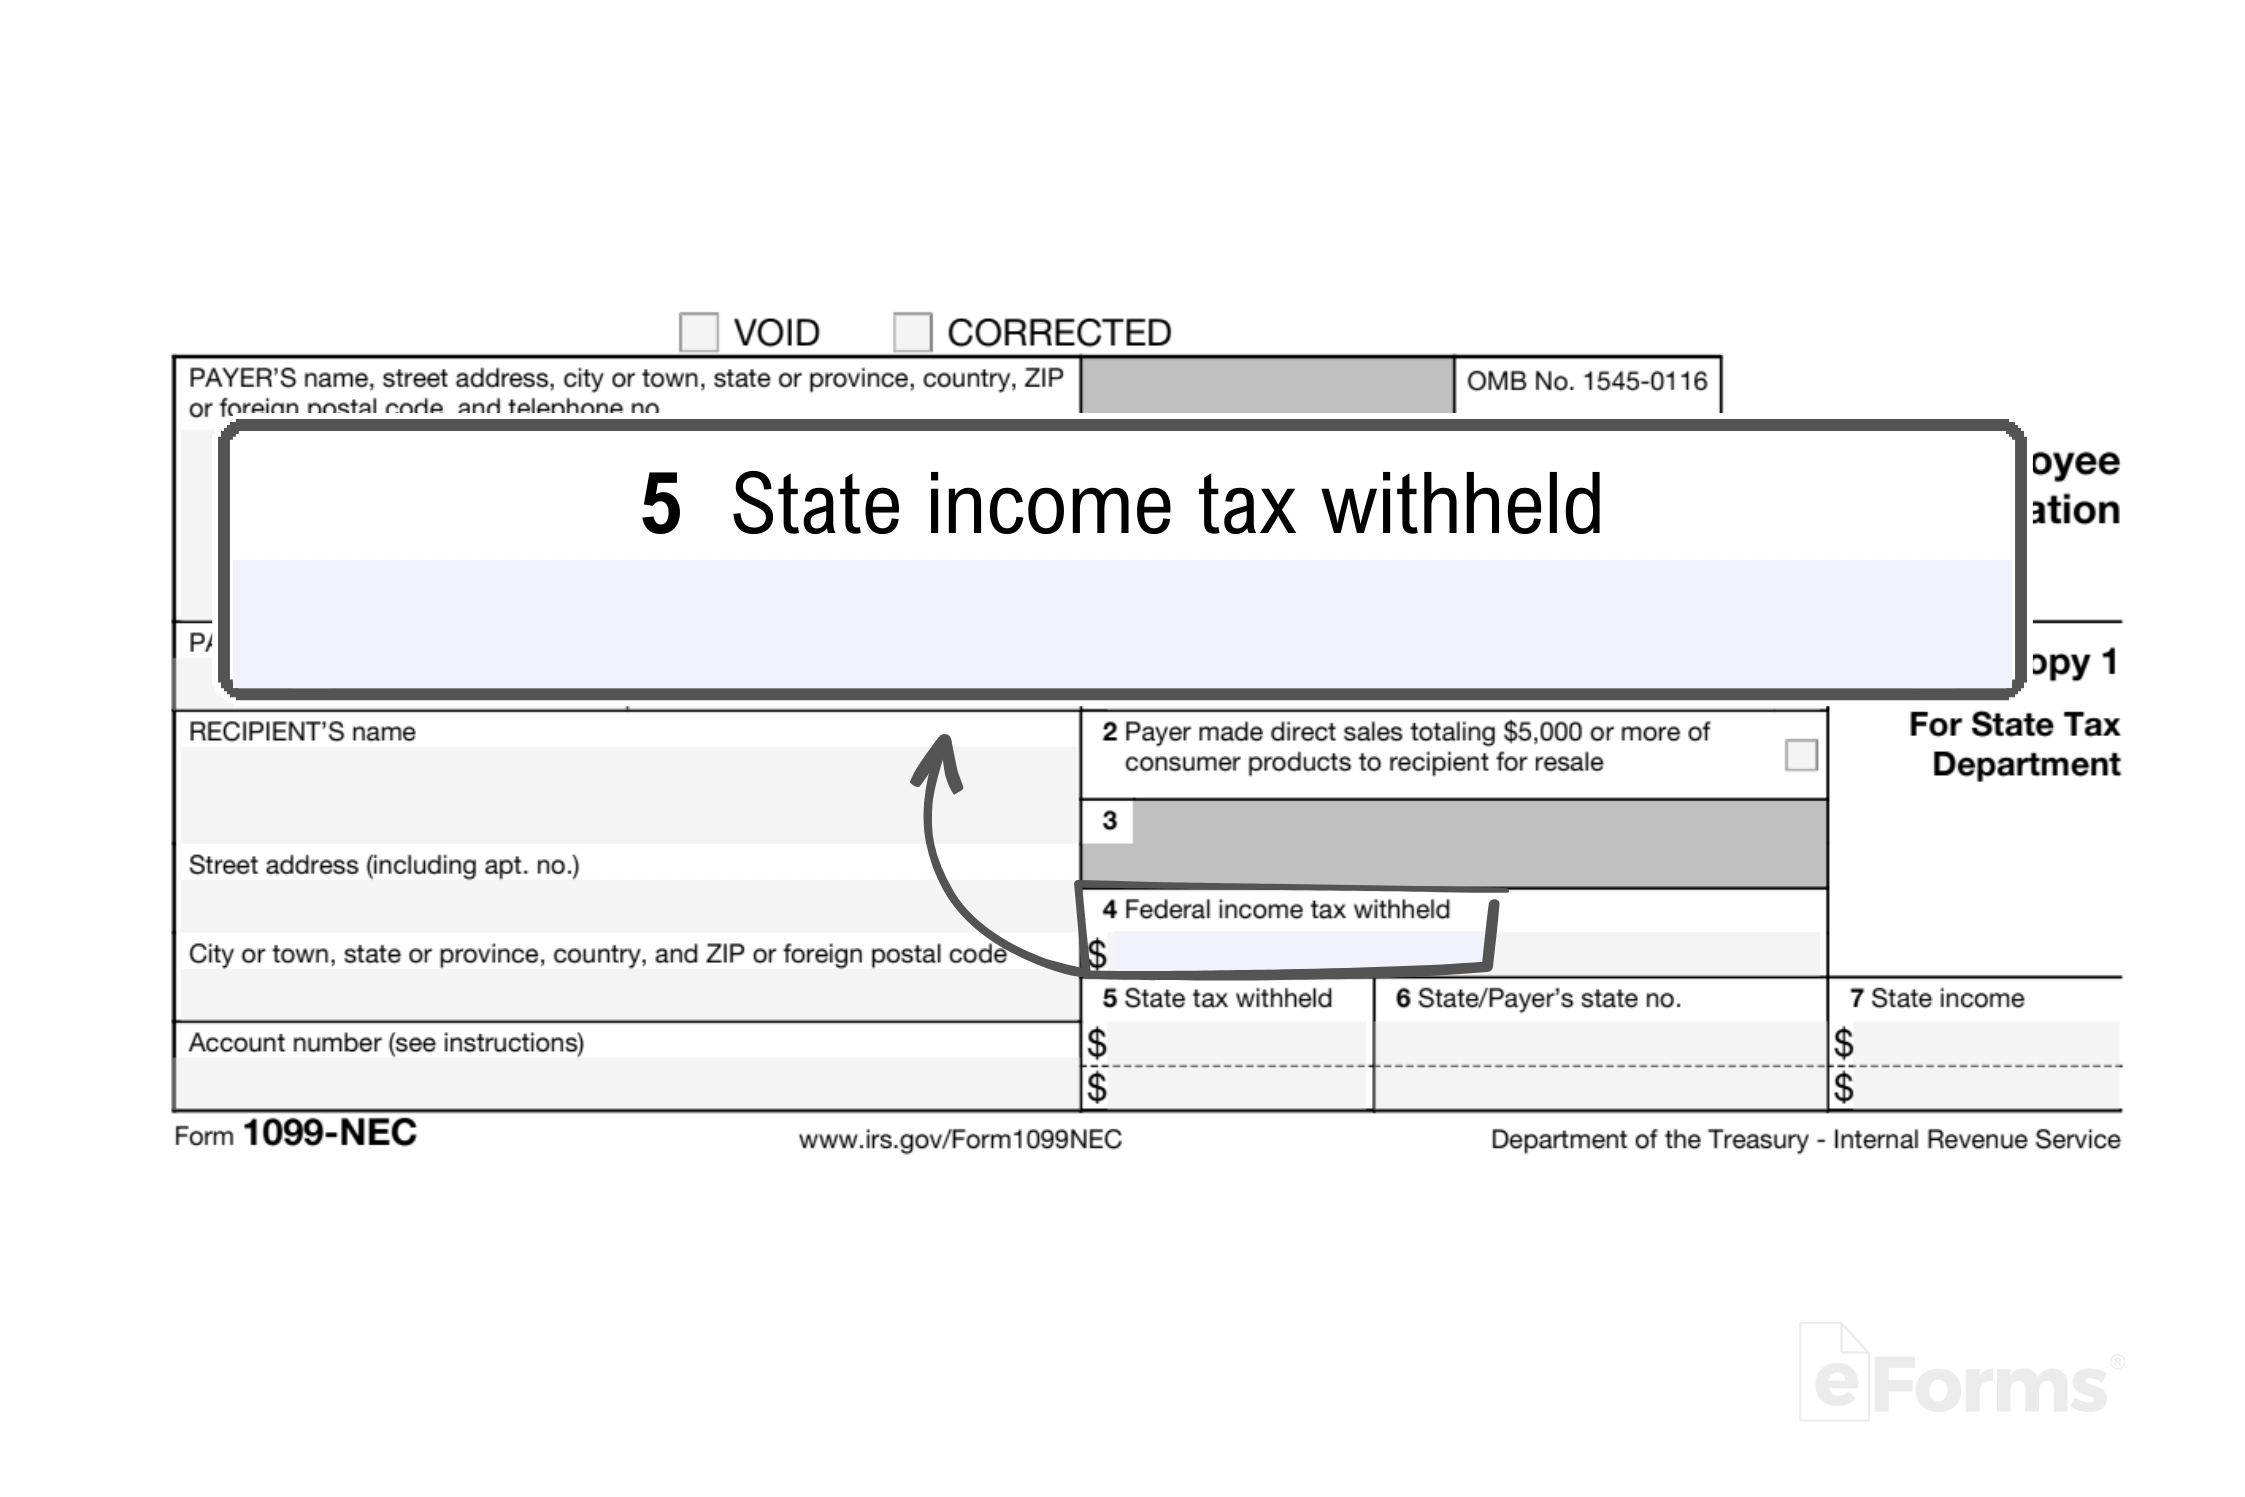 State income tax witholding